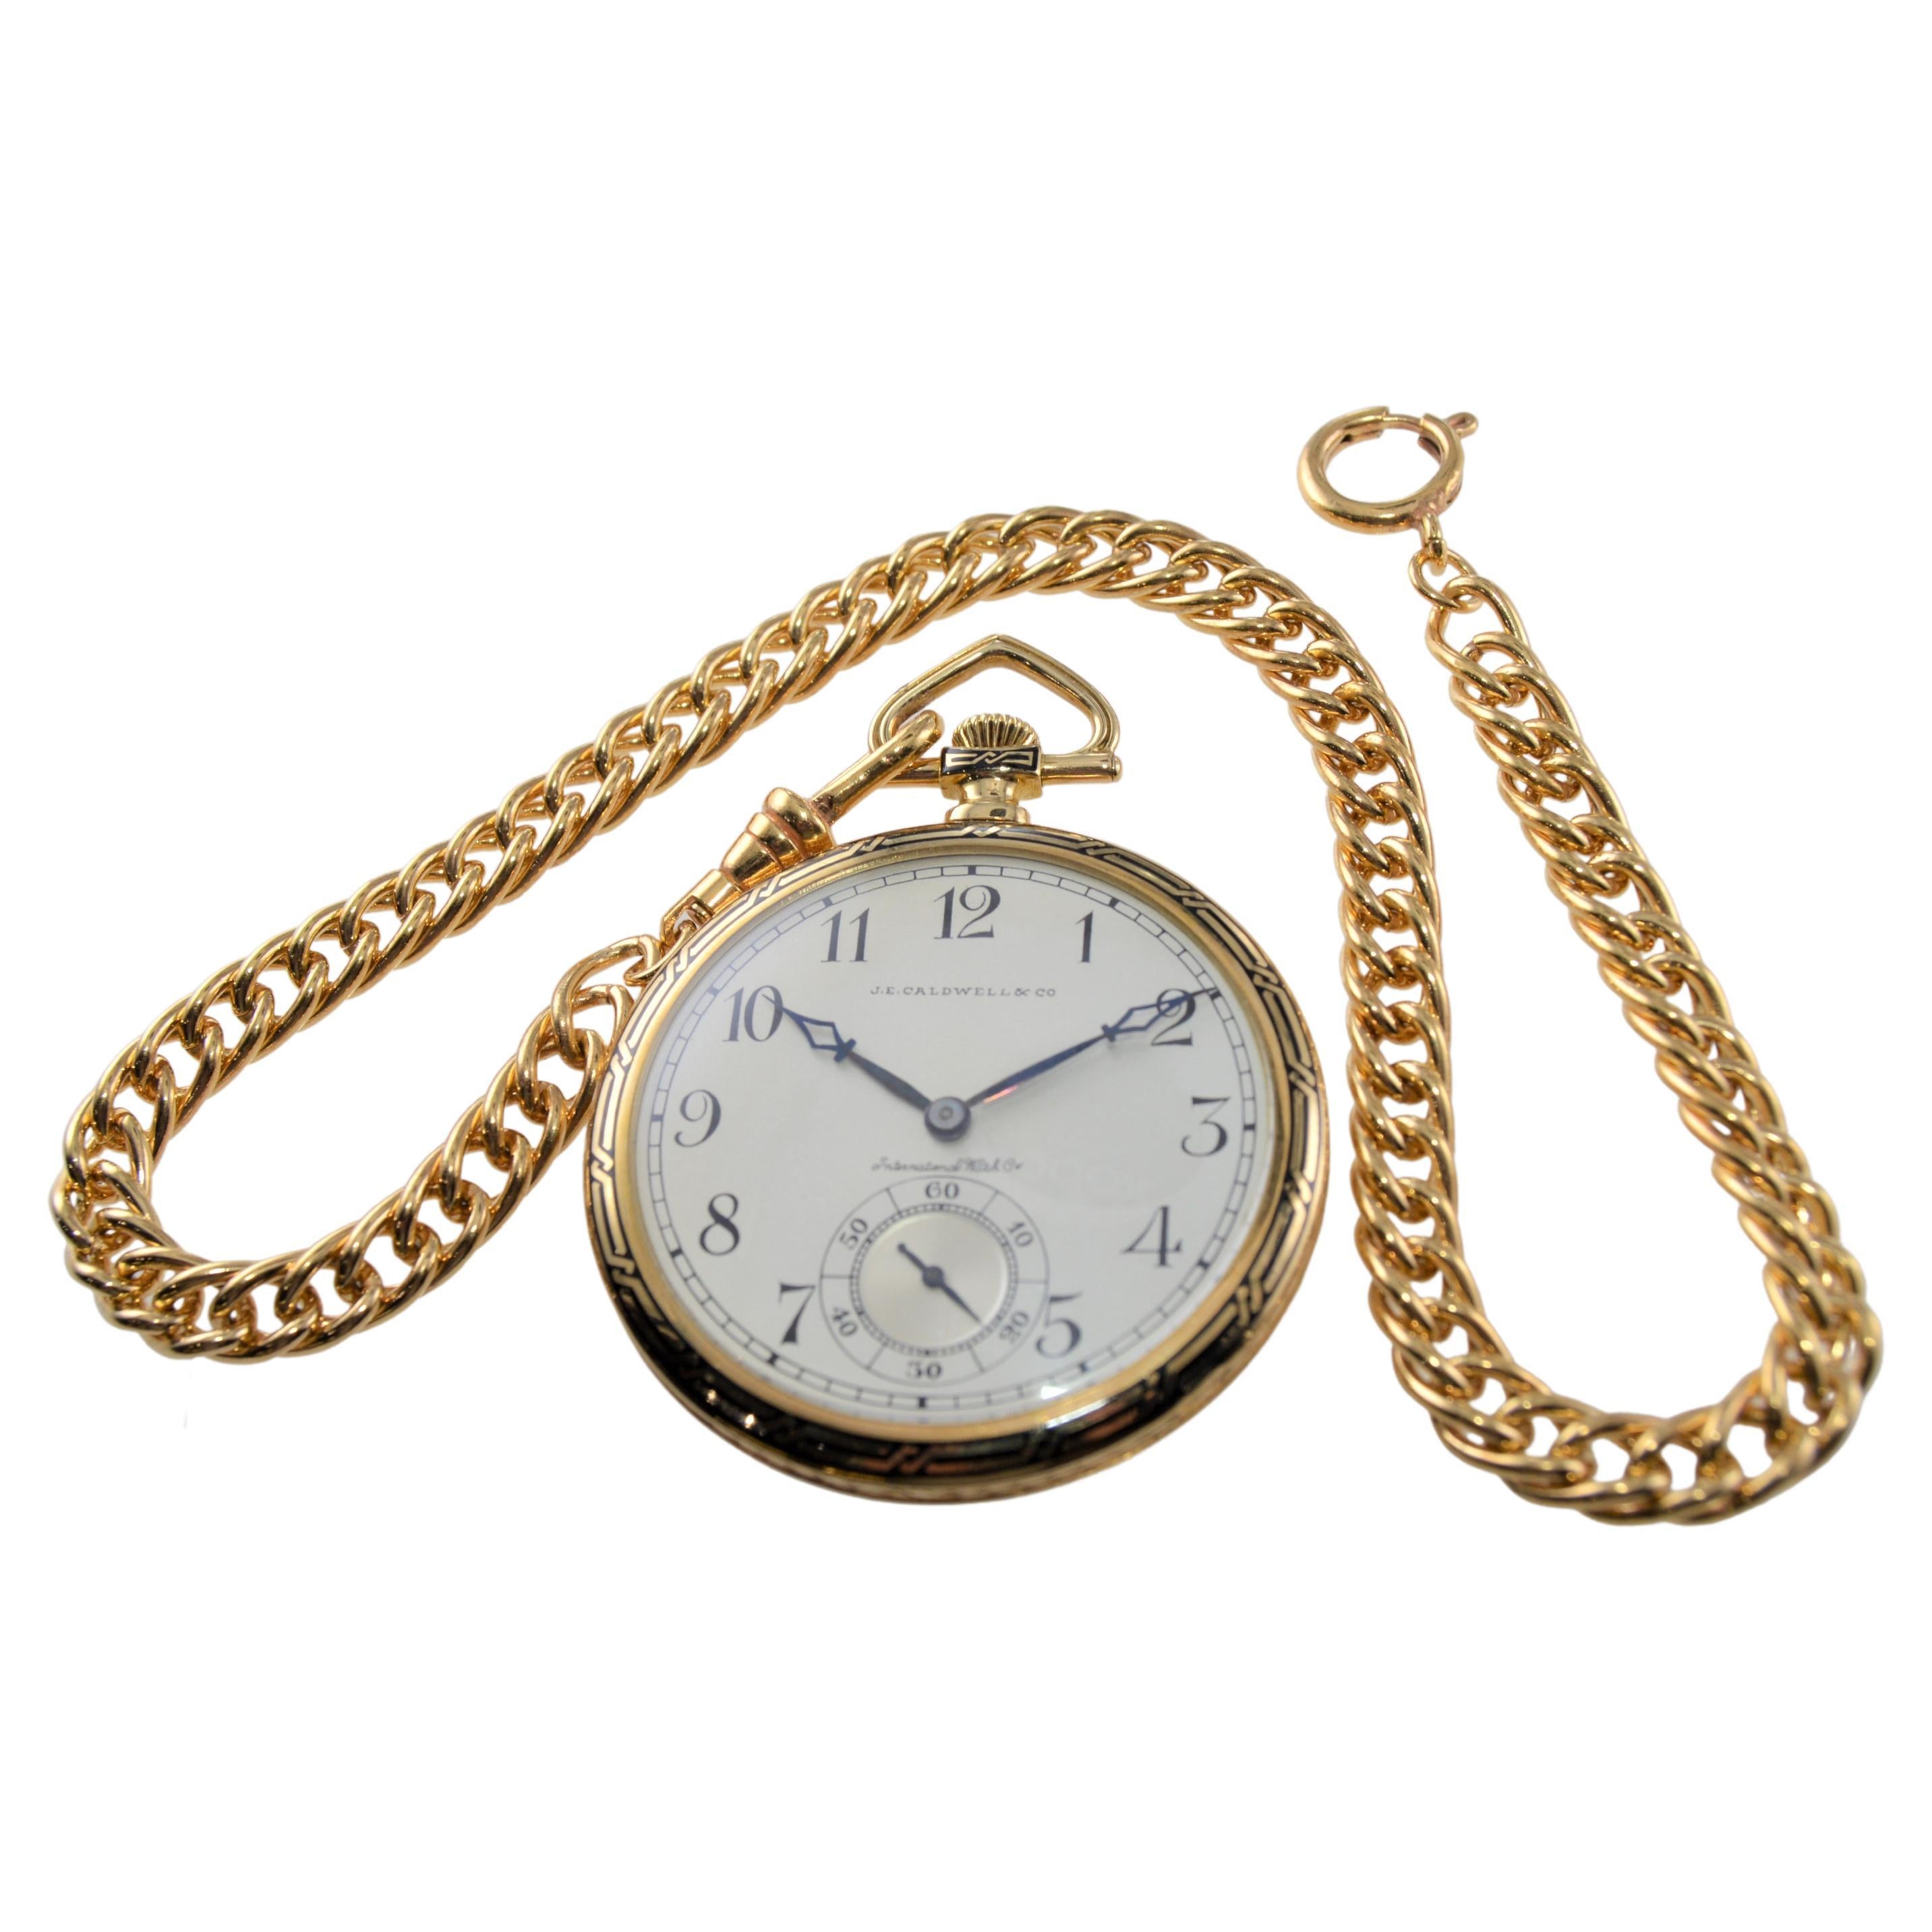 J.E. Caldwell by I.W.C. 18Kt Yellow Gold Open Faced Art Deco Pocket Watch, 1930s